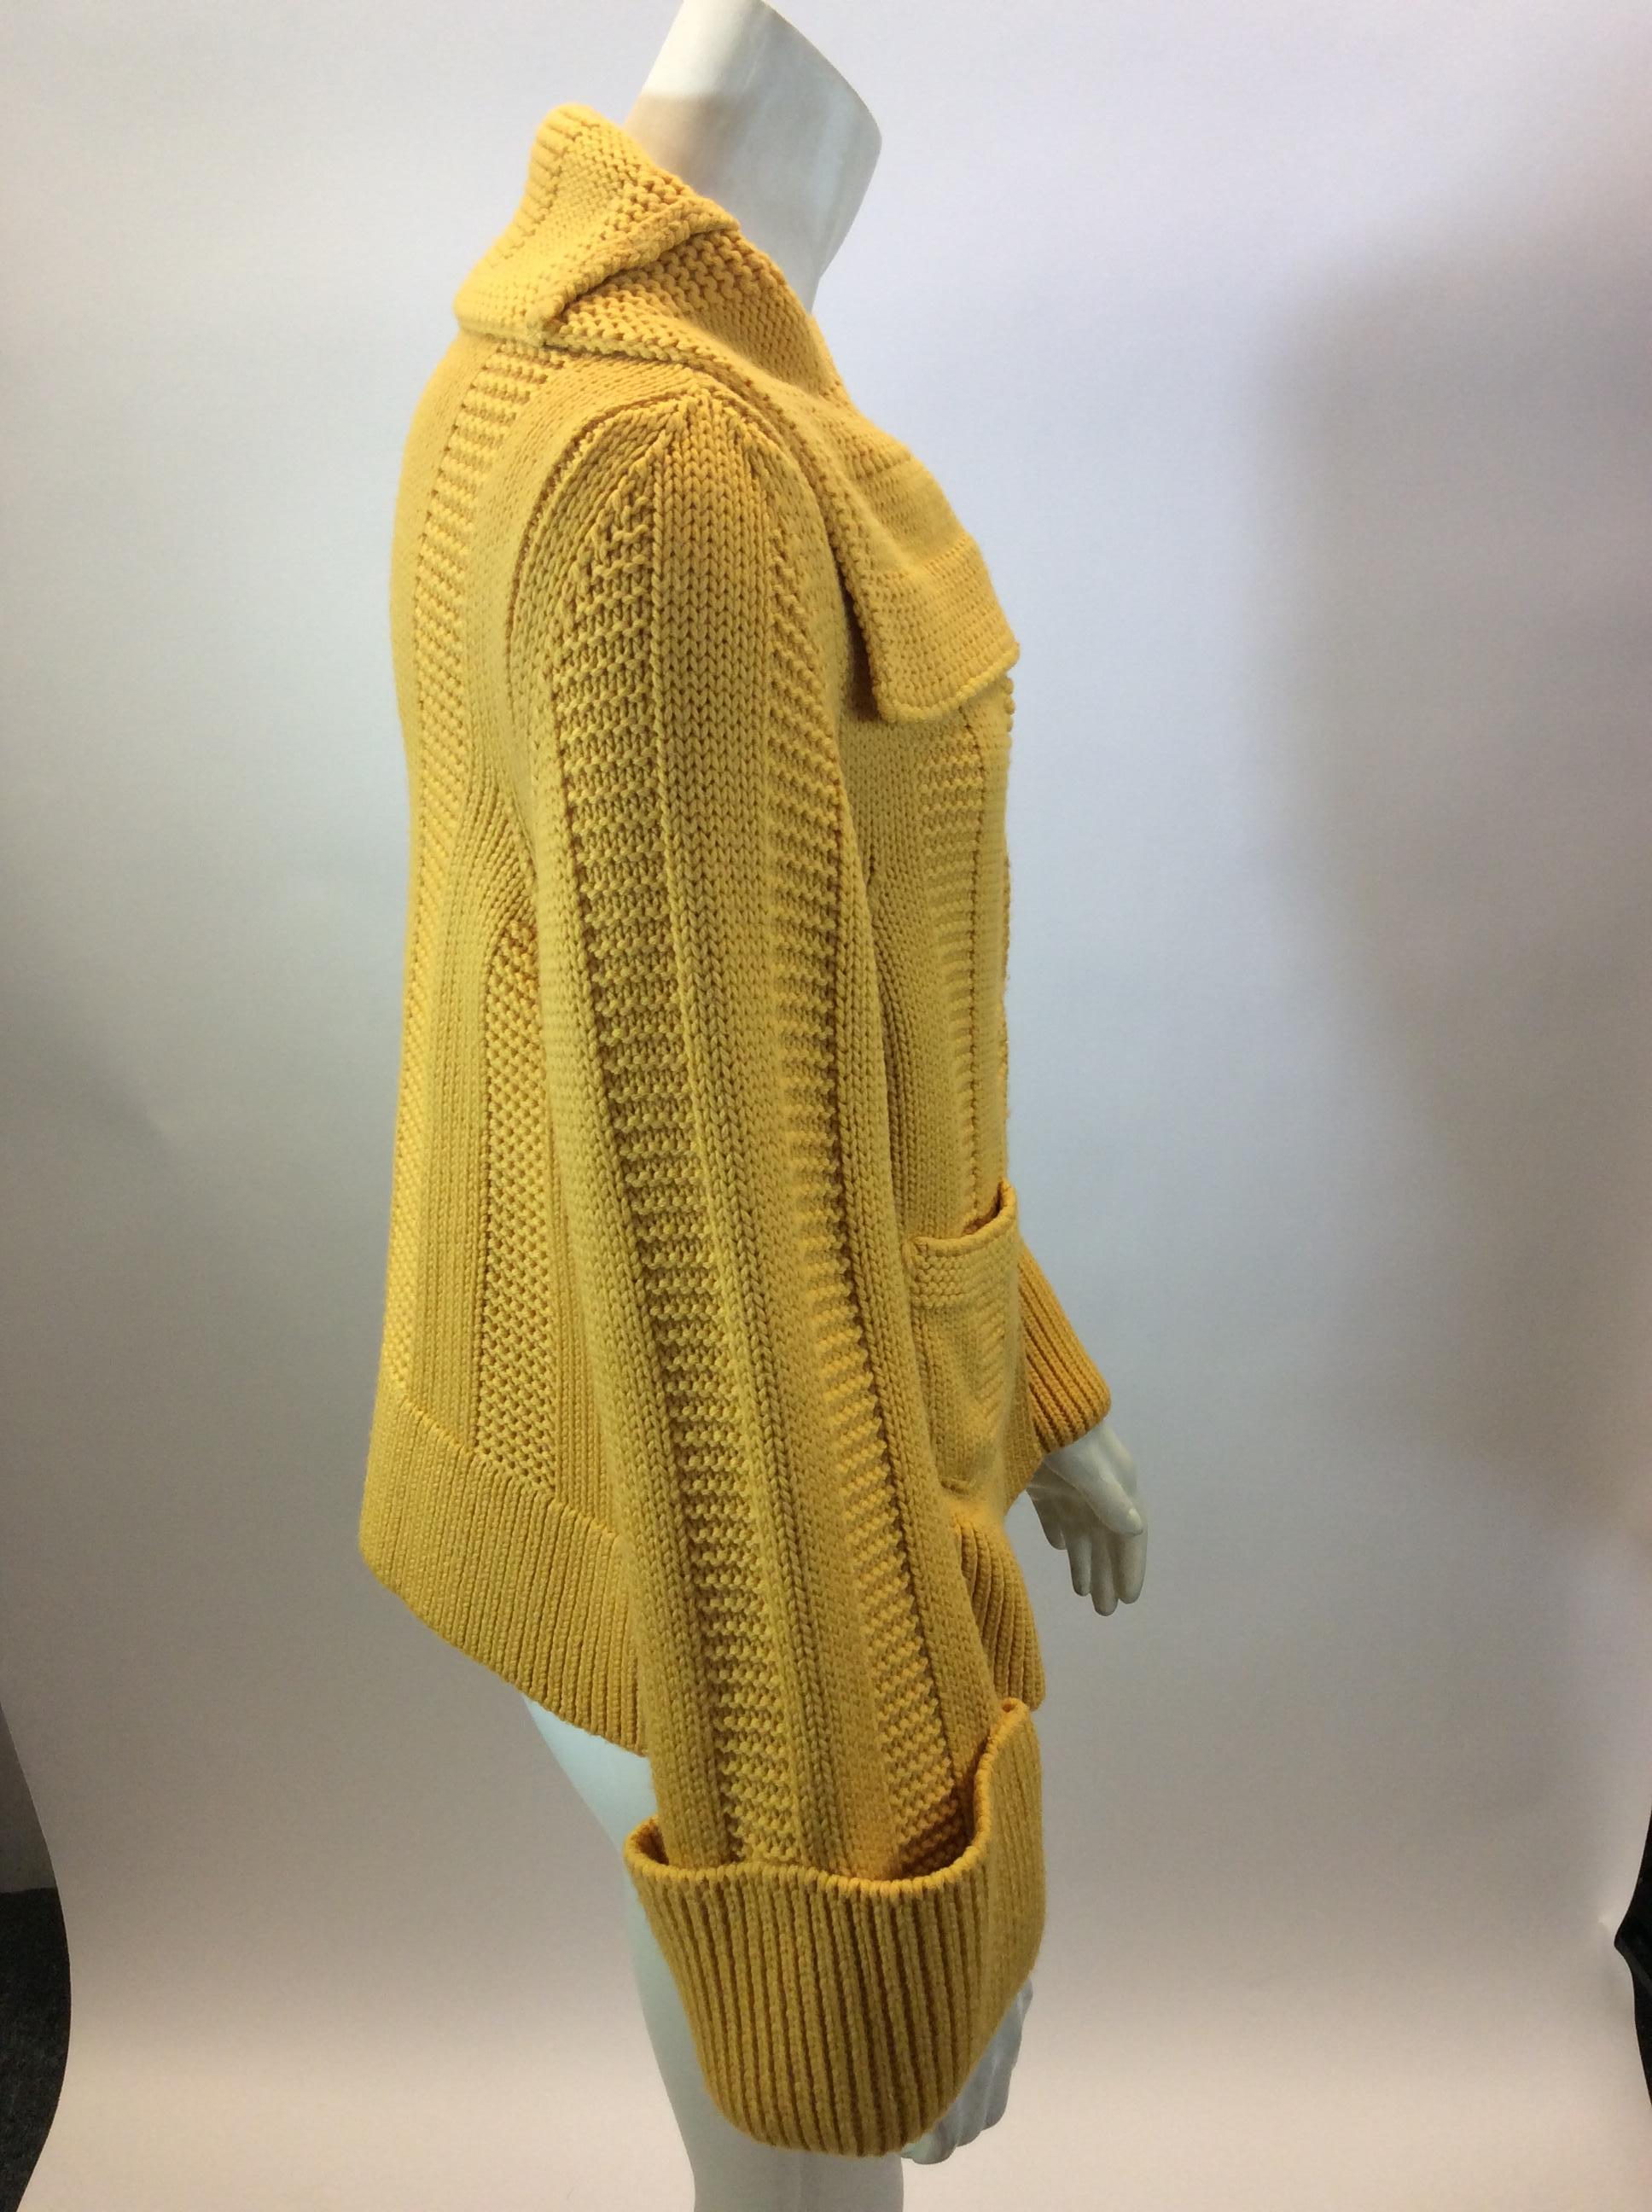 Piazza Sempione Marigold Wool Sweater In Good Condition For Sale In Narberth, PA